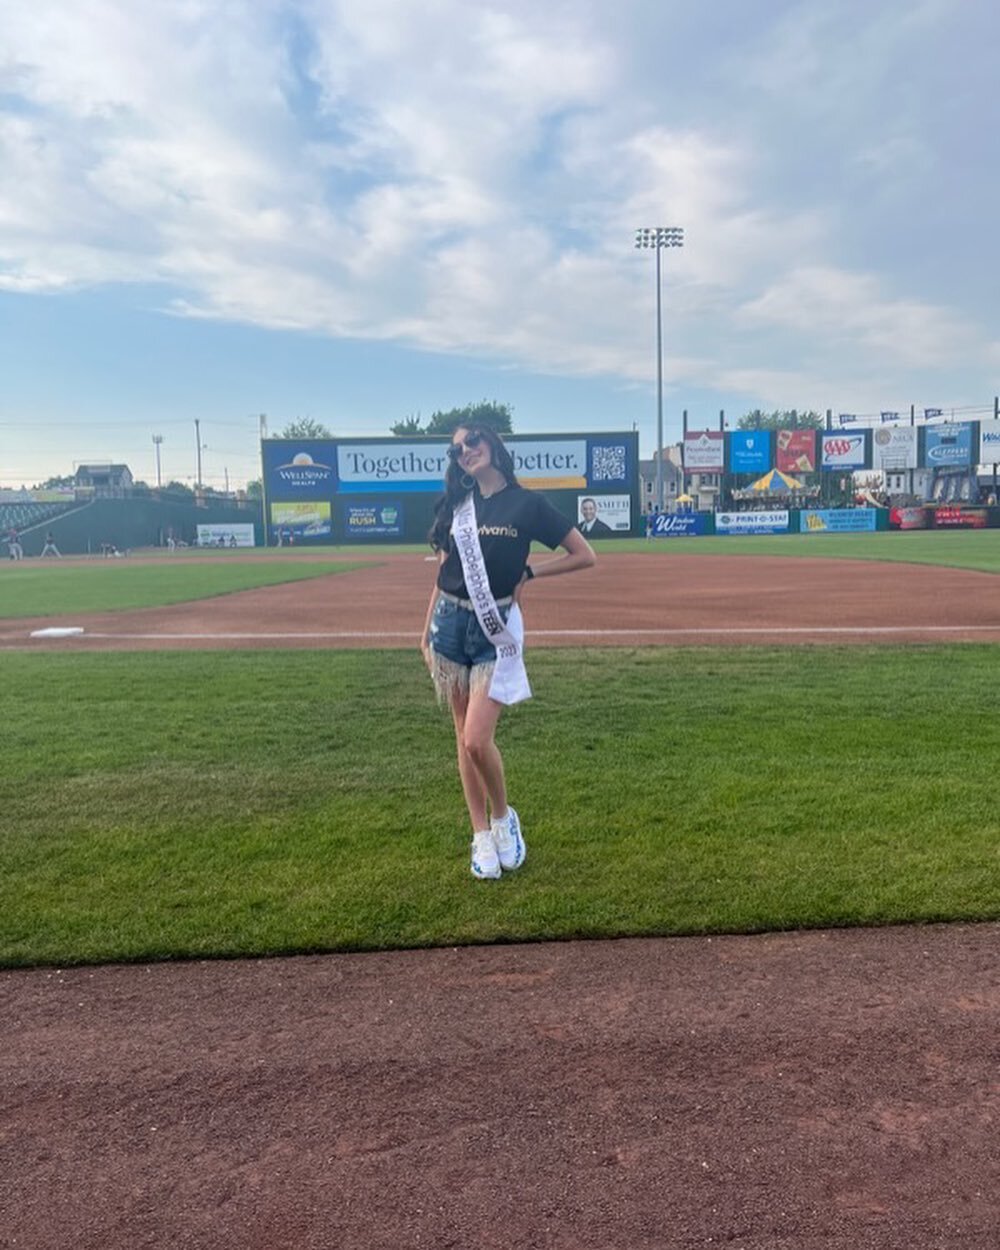 Take me out to the ball game! ⚾️ What a fun night at @yorkrevolution with my sisters.. watching the team play, showing off our shoes in a shoe parade, and taking in all the fun festivities. What an amazing evening! 💕